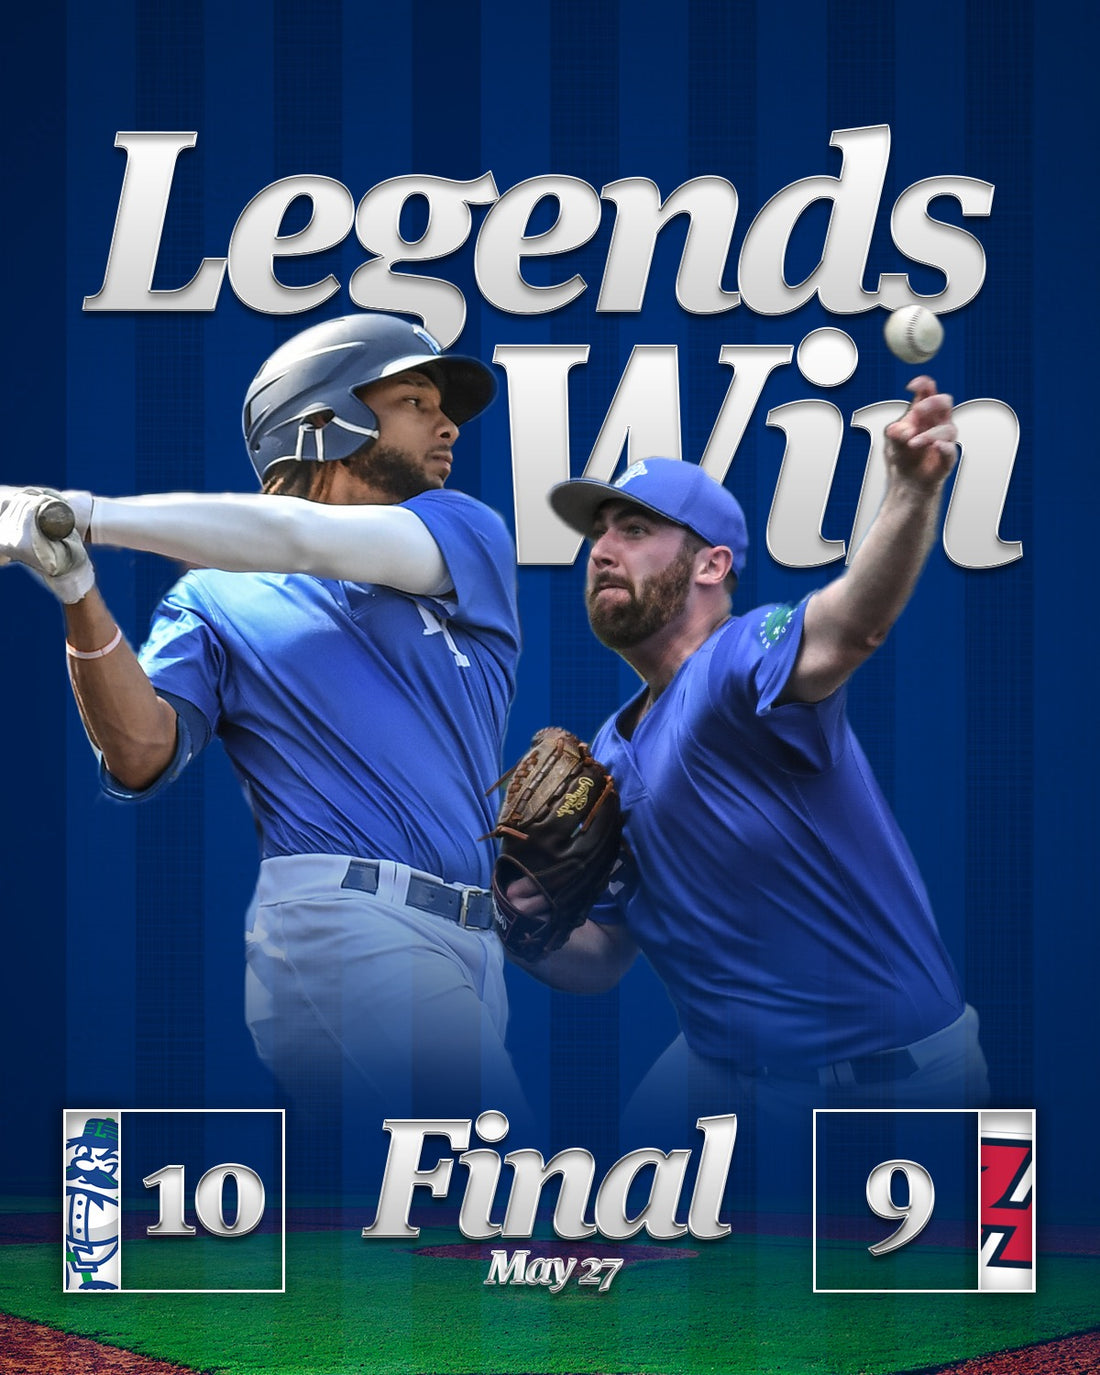 Legends Offense Leads The Way to 10-9 Win